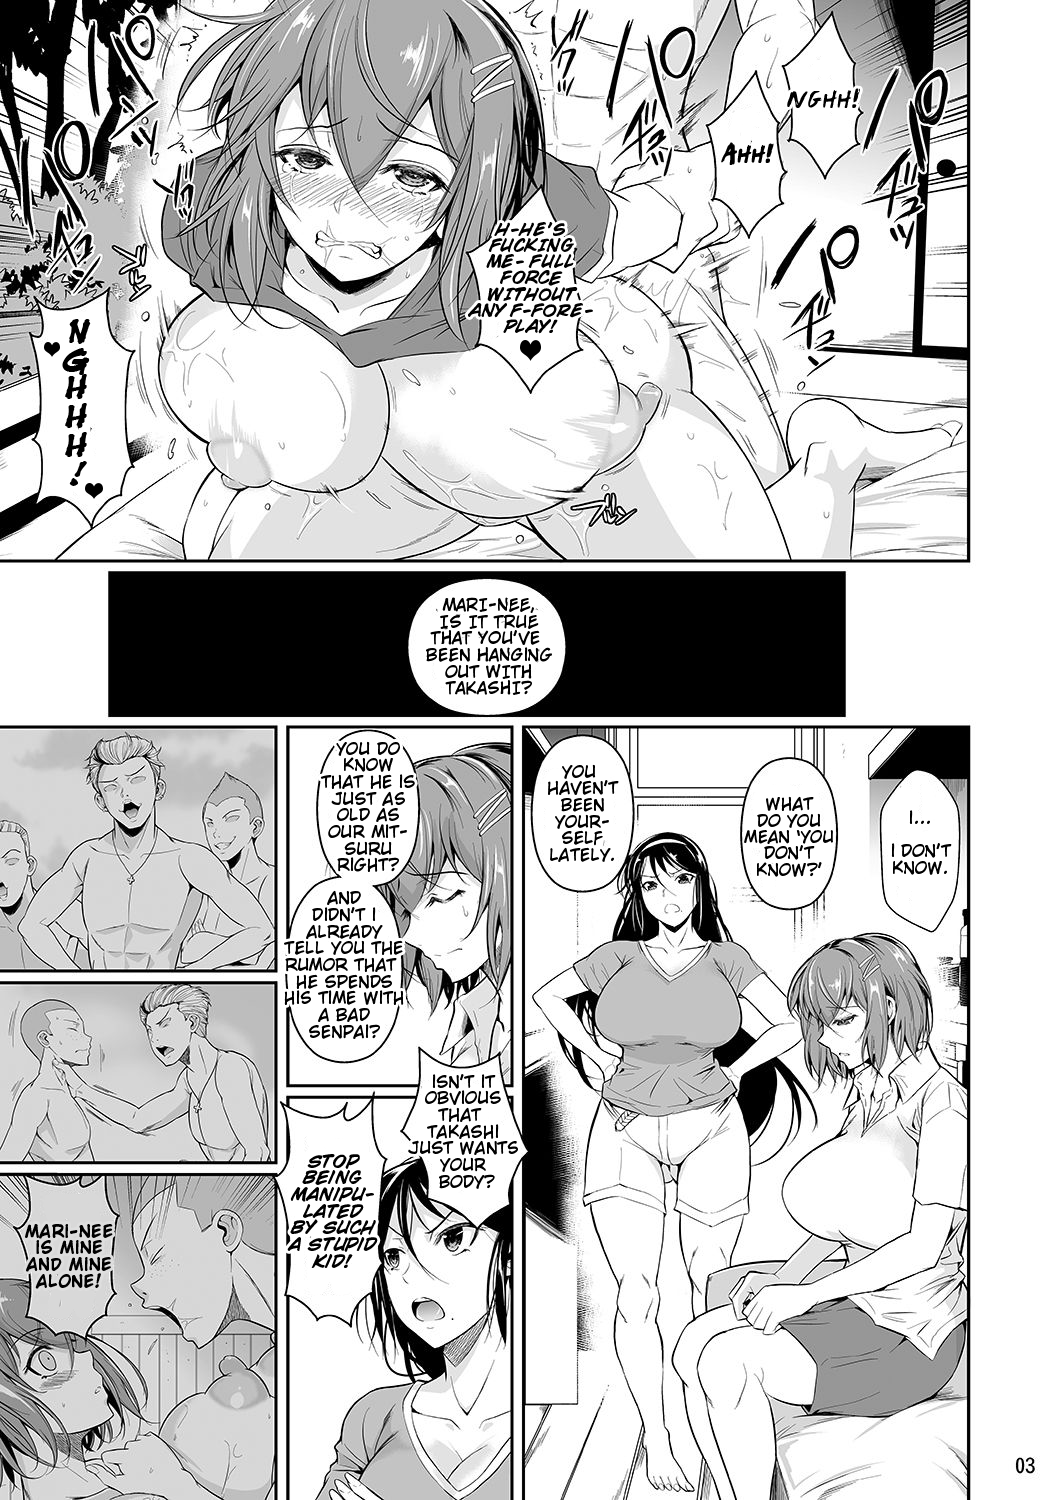 Huge titty schoolgirl is used like a cum dumpster in dirty hotel - sex comics photo